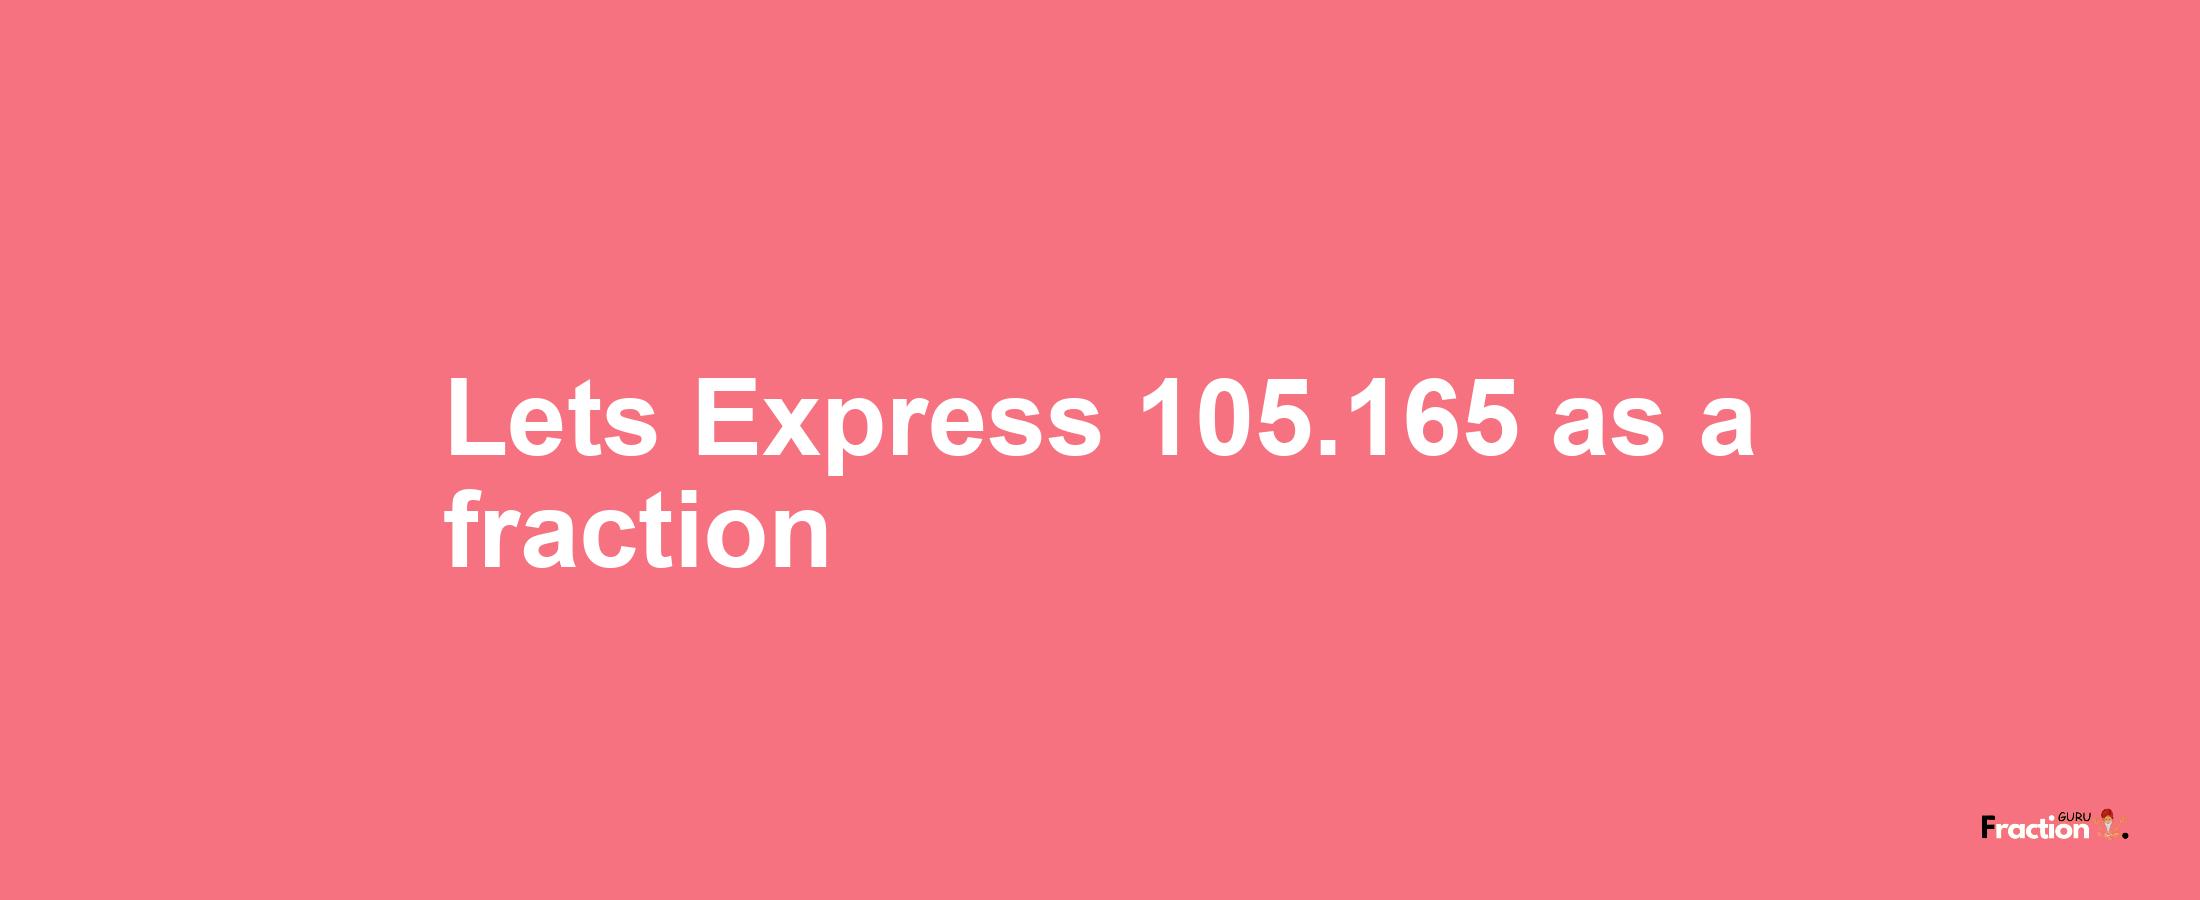 Lets Express 105.165 as afraction